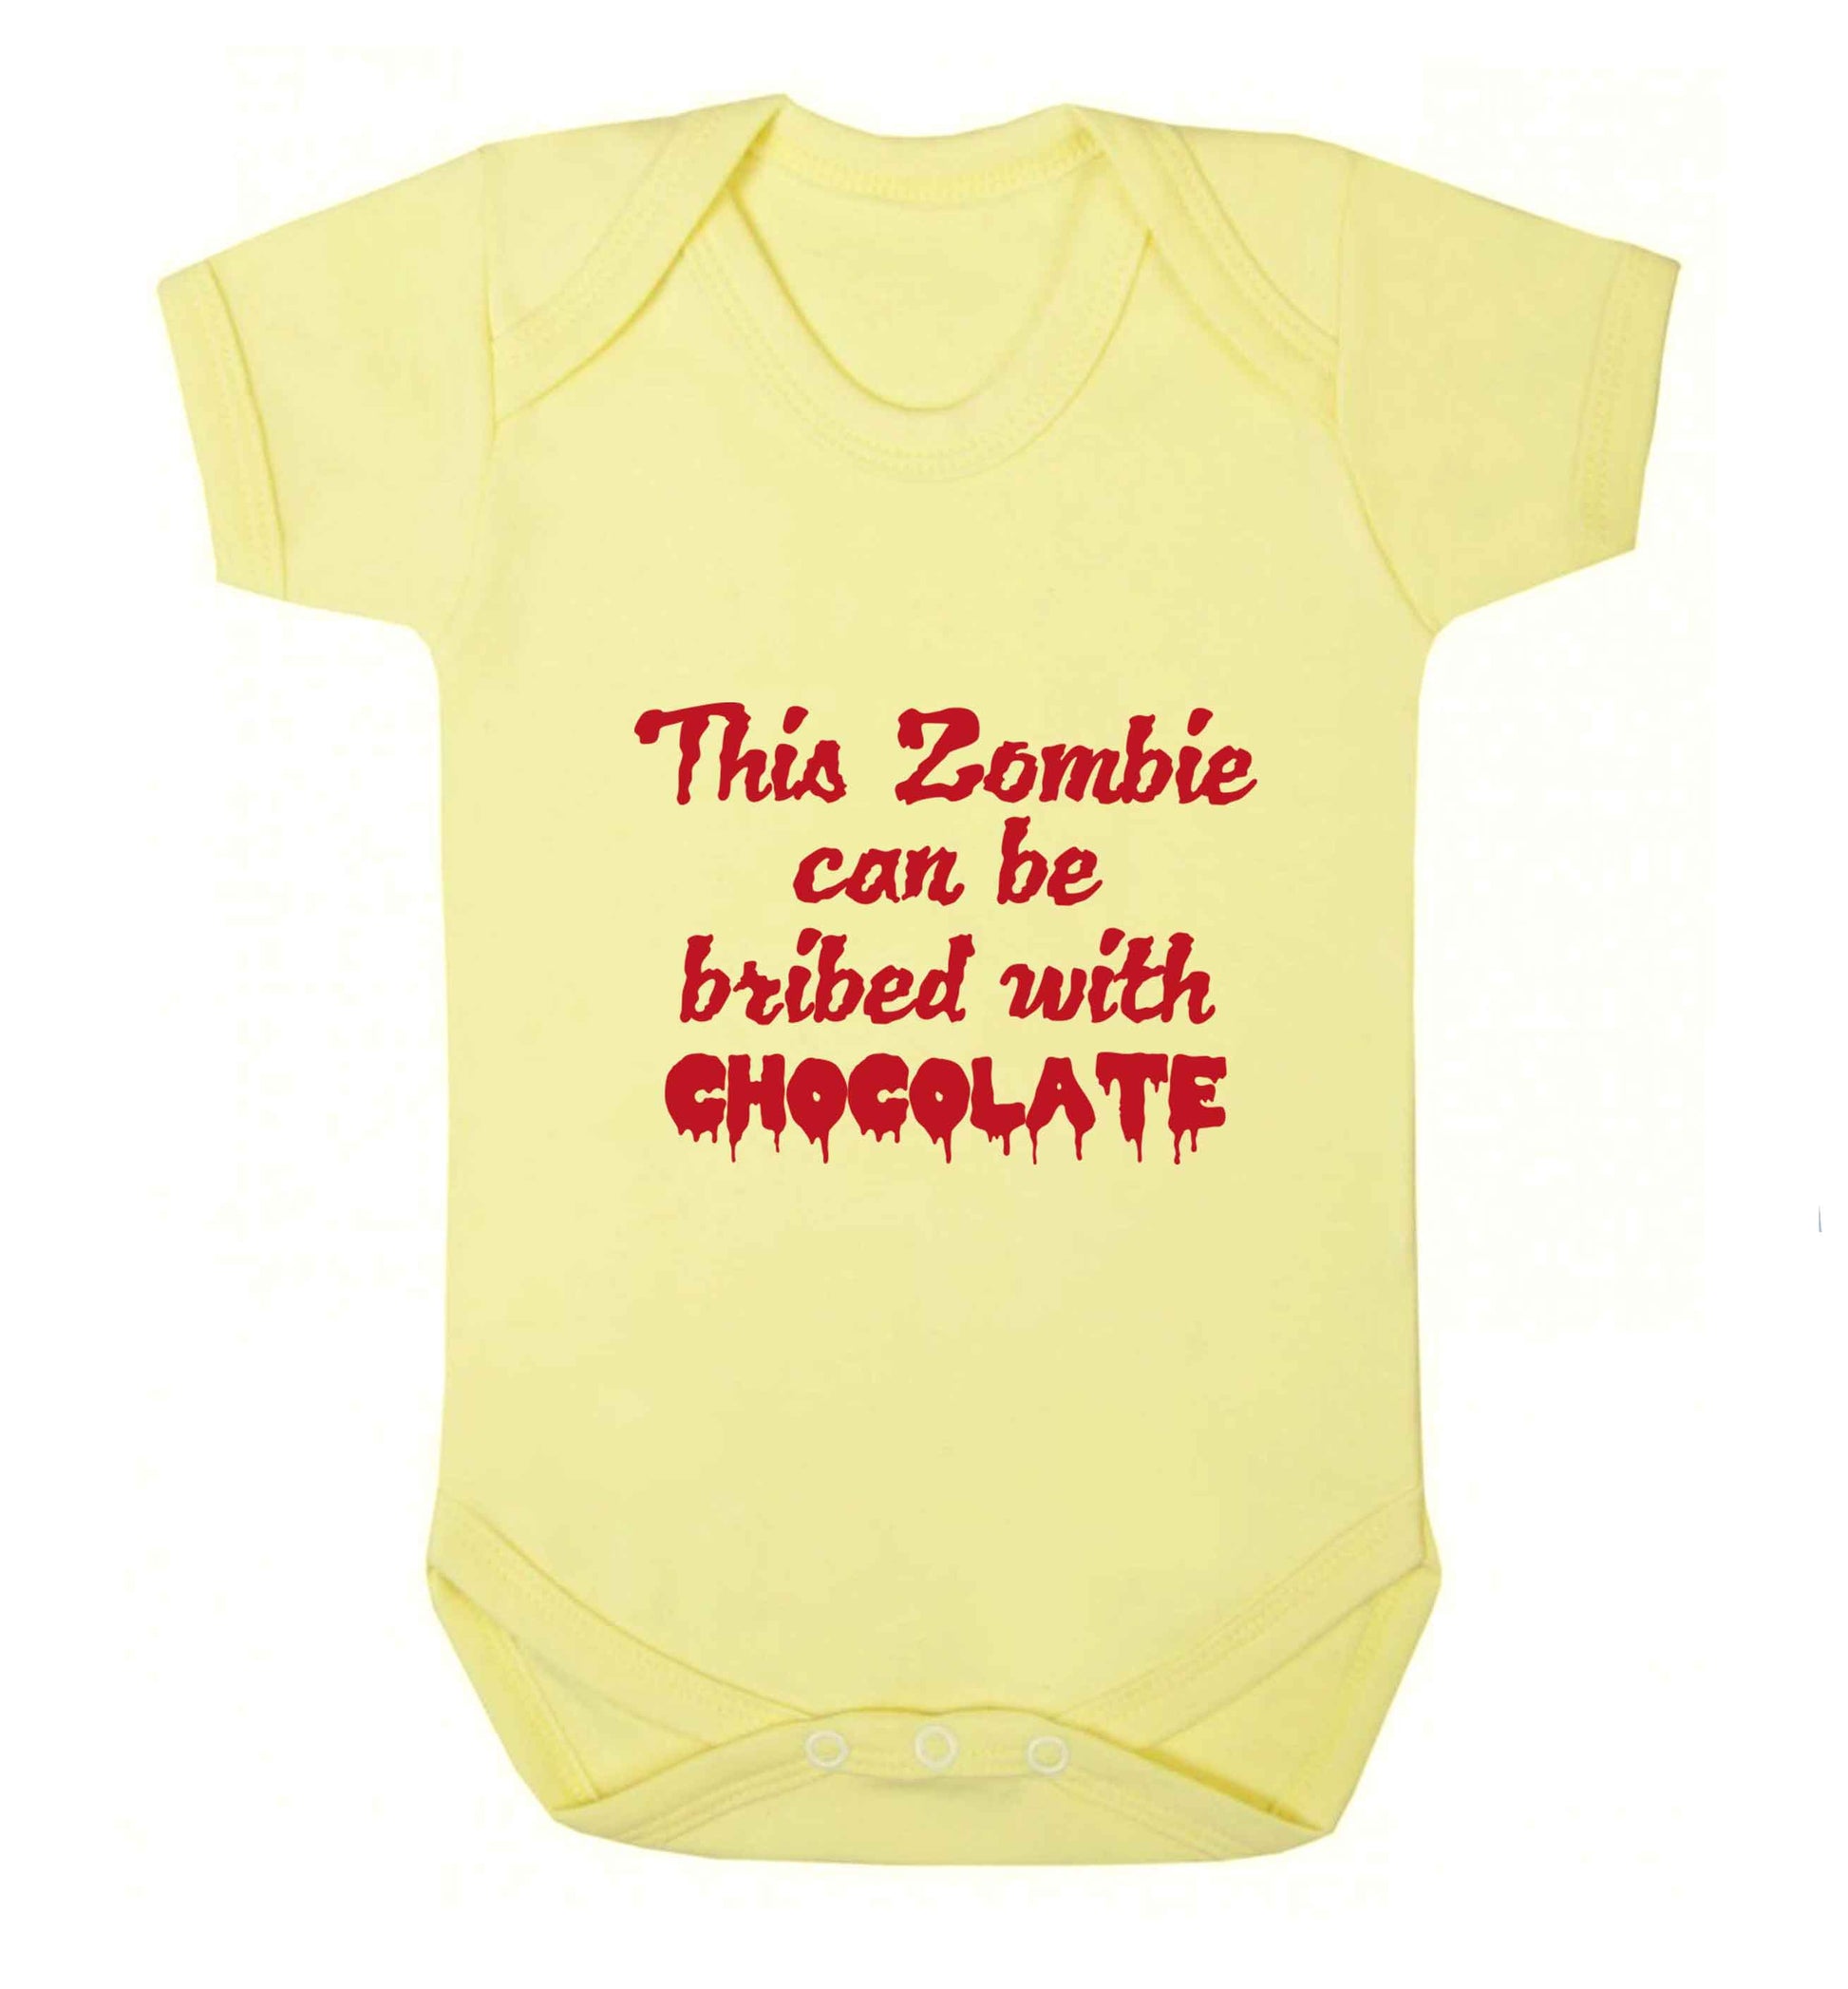 This zombie can be bribed with chocolate baby vest pale yellow 18-24 months